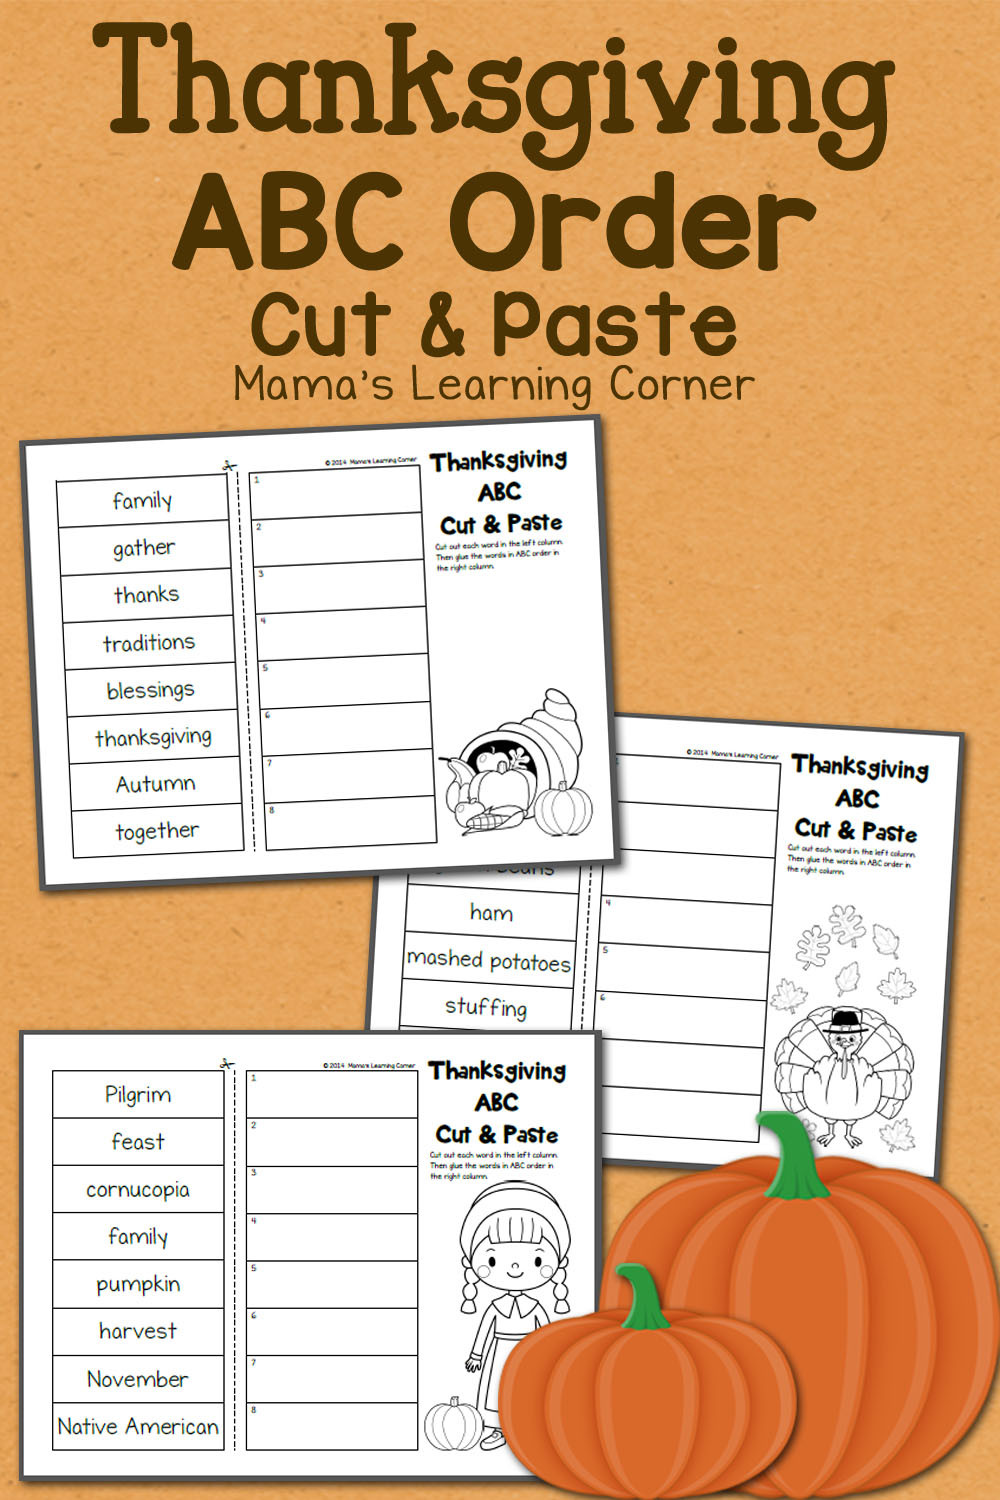 2nd Grade Thanksgiving Crafts
 Thanksgiving ABC Order Cut and Paste Worksheets Mamas